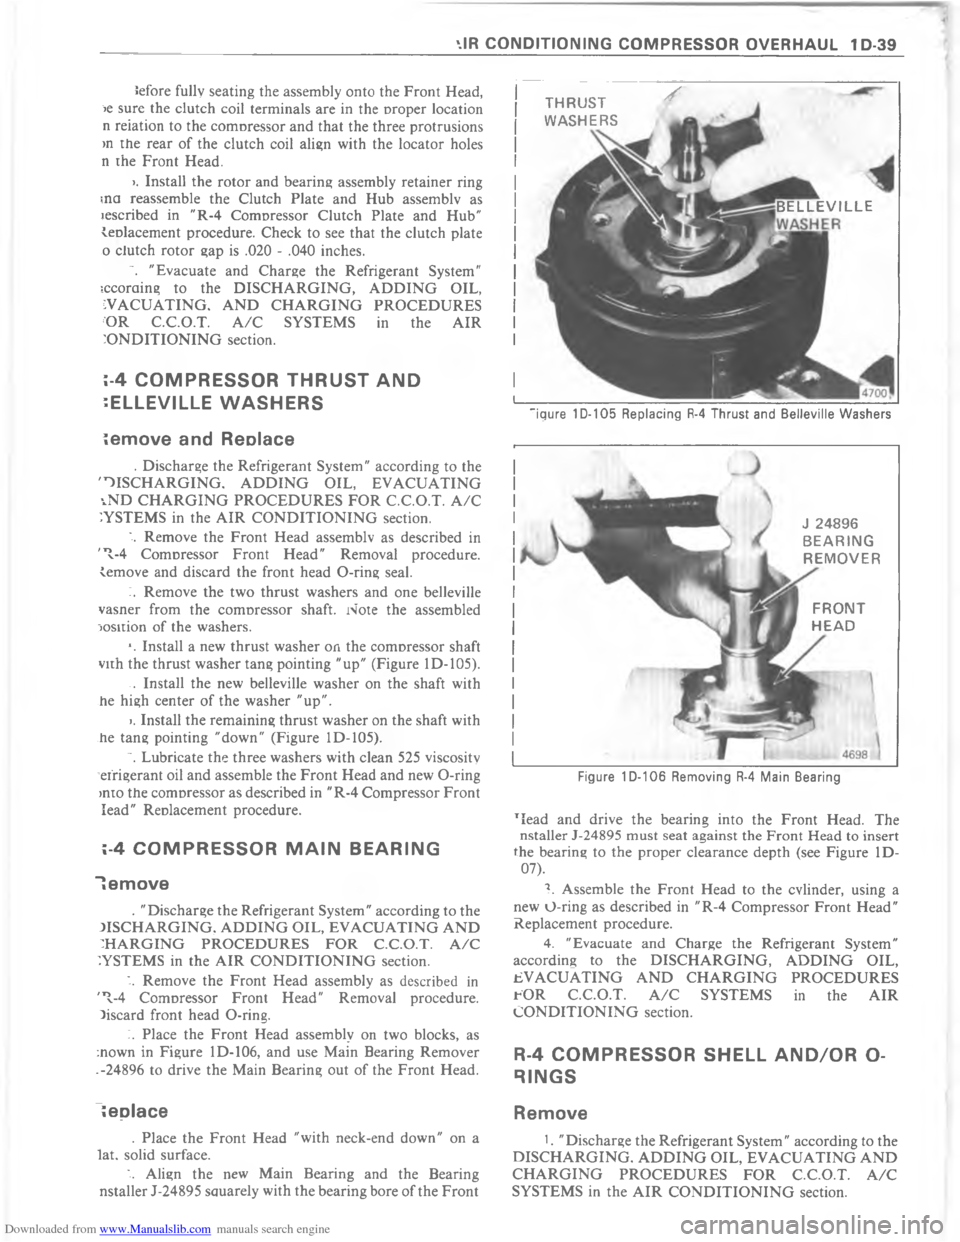 CHEVROLET MALIBU 1980 4.G Service Manual Downloaded from www.Manualslib.com manuals search engine  	      9        	                (    0 

	

